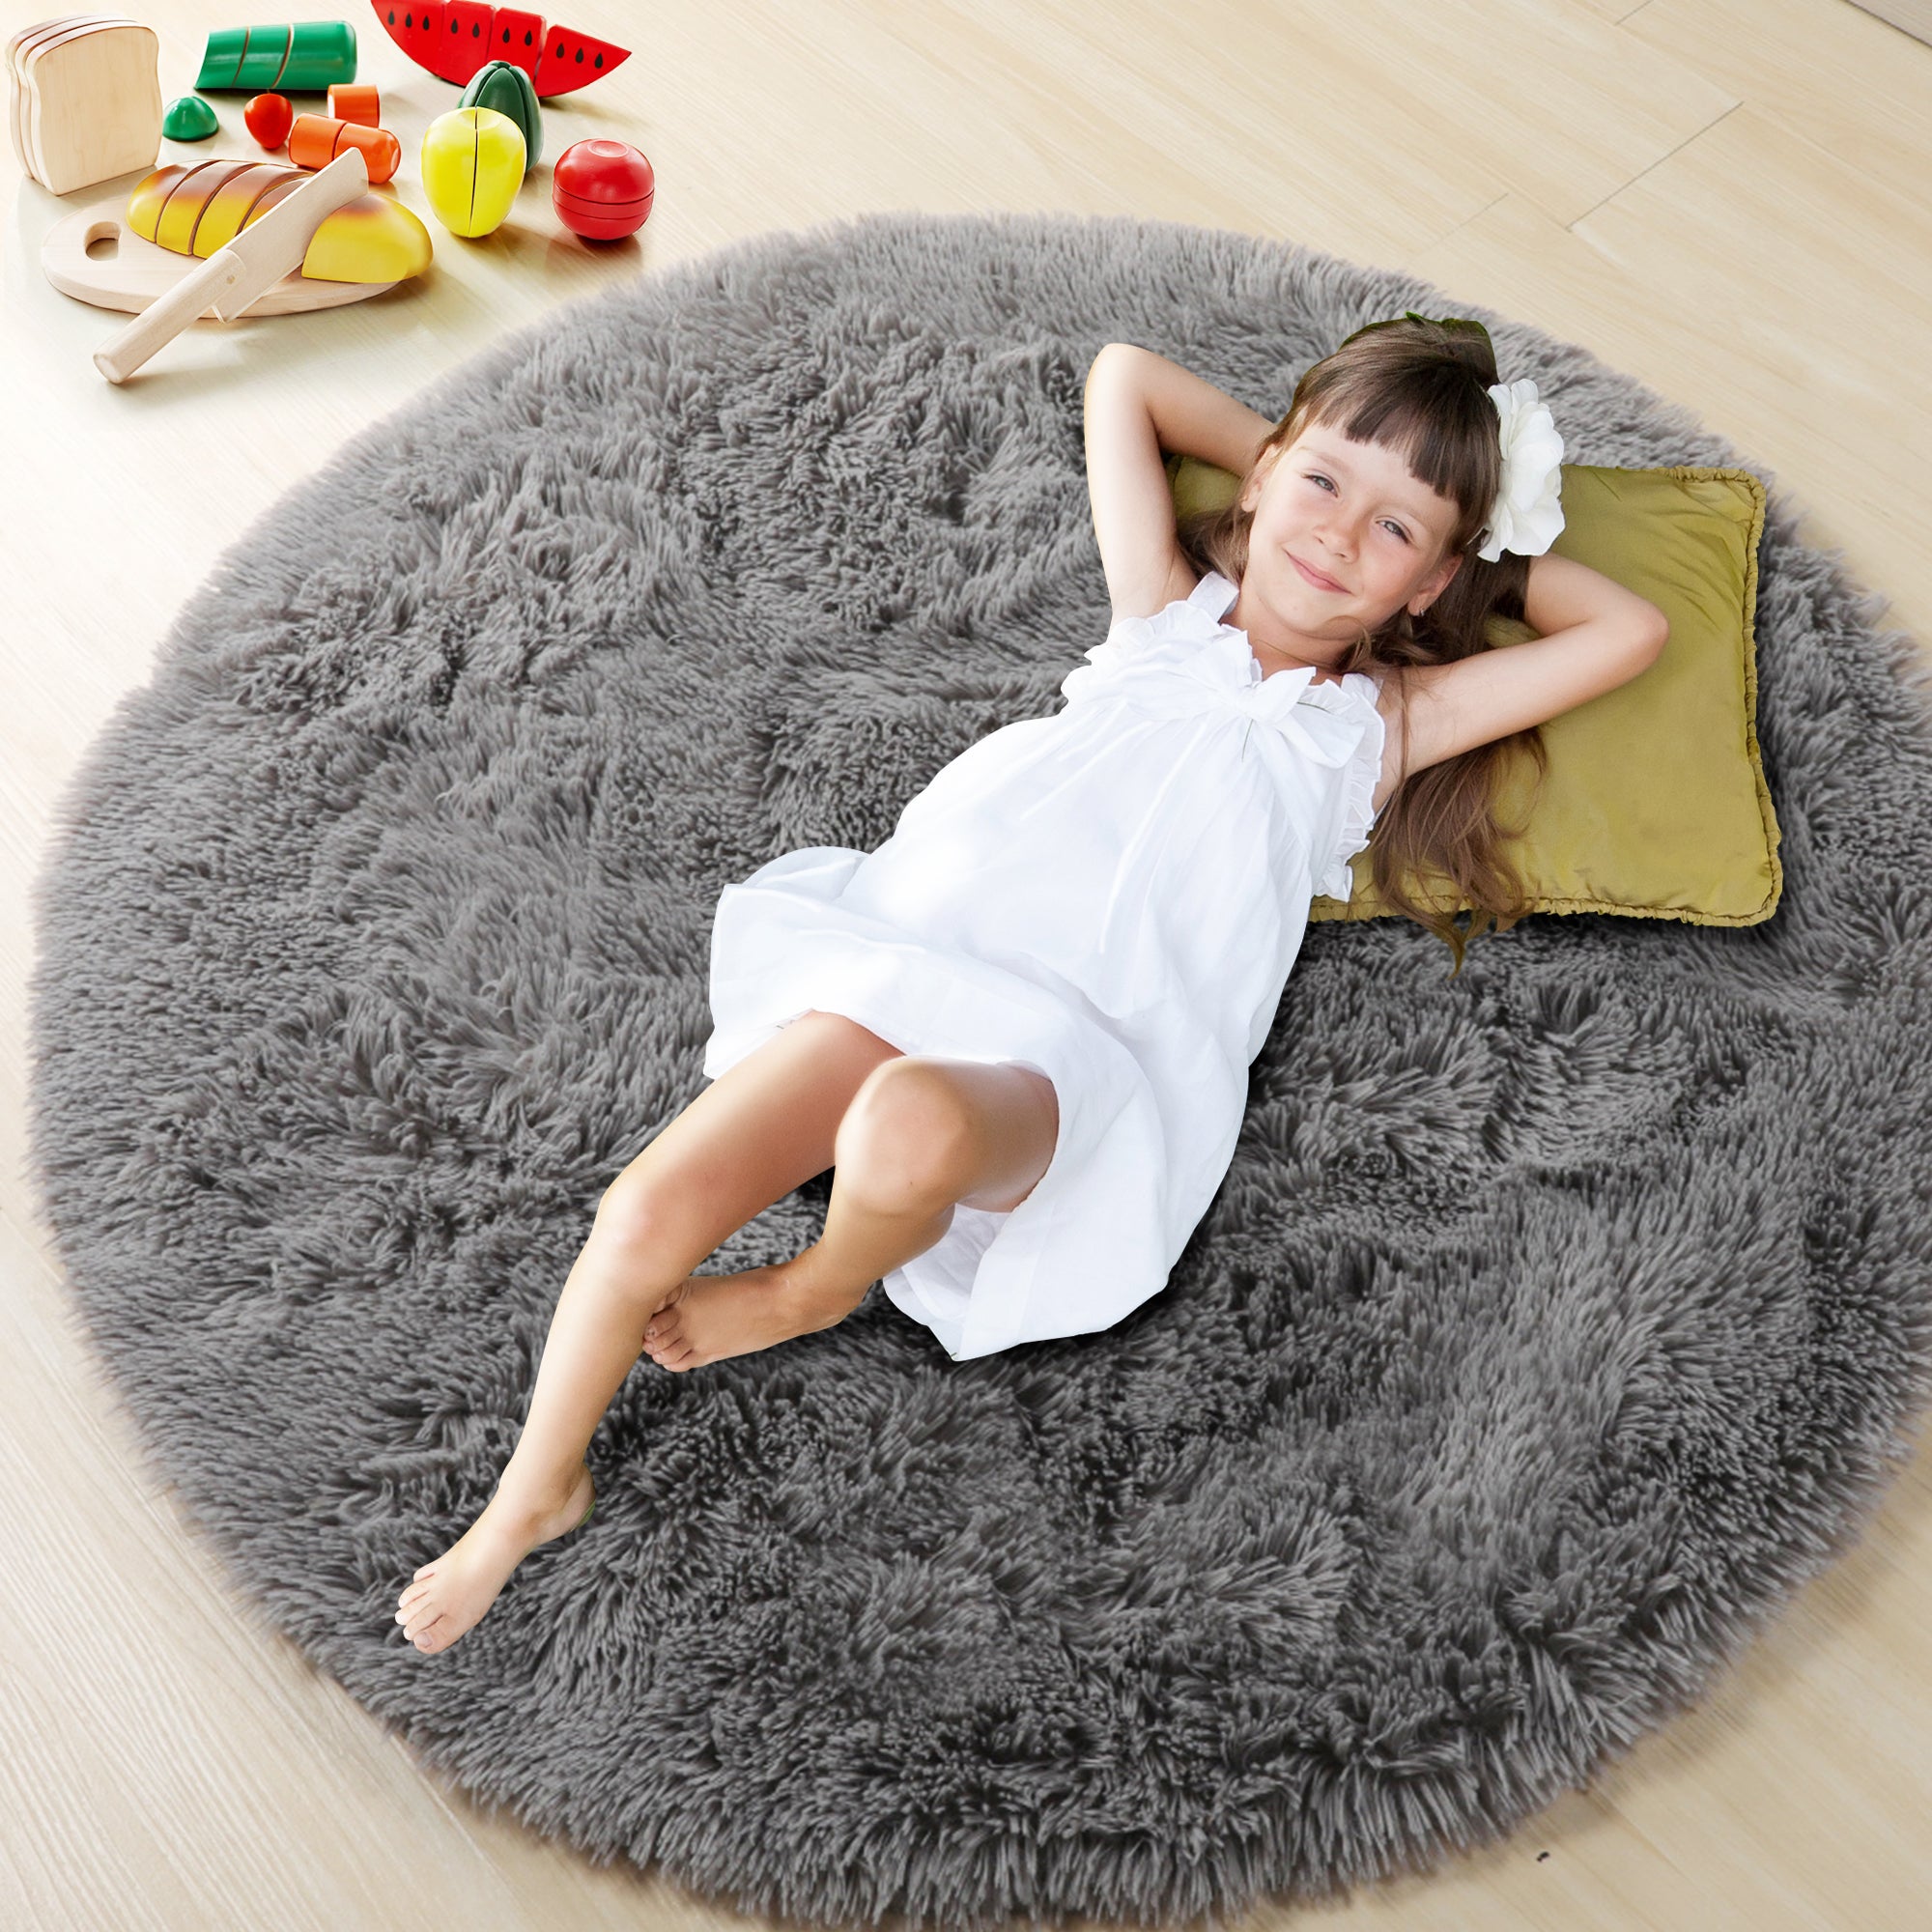 for Kids RoomSoft Plush Gray Round Area Rug